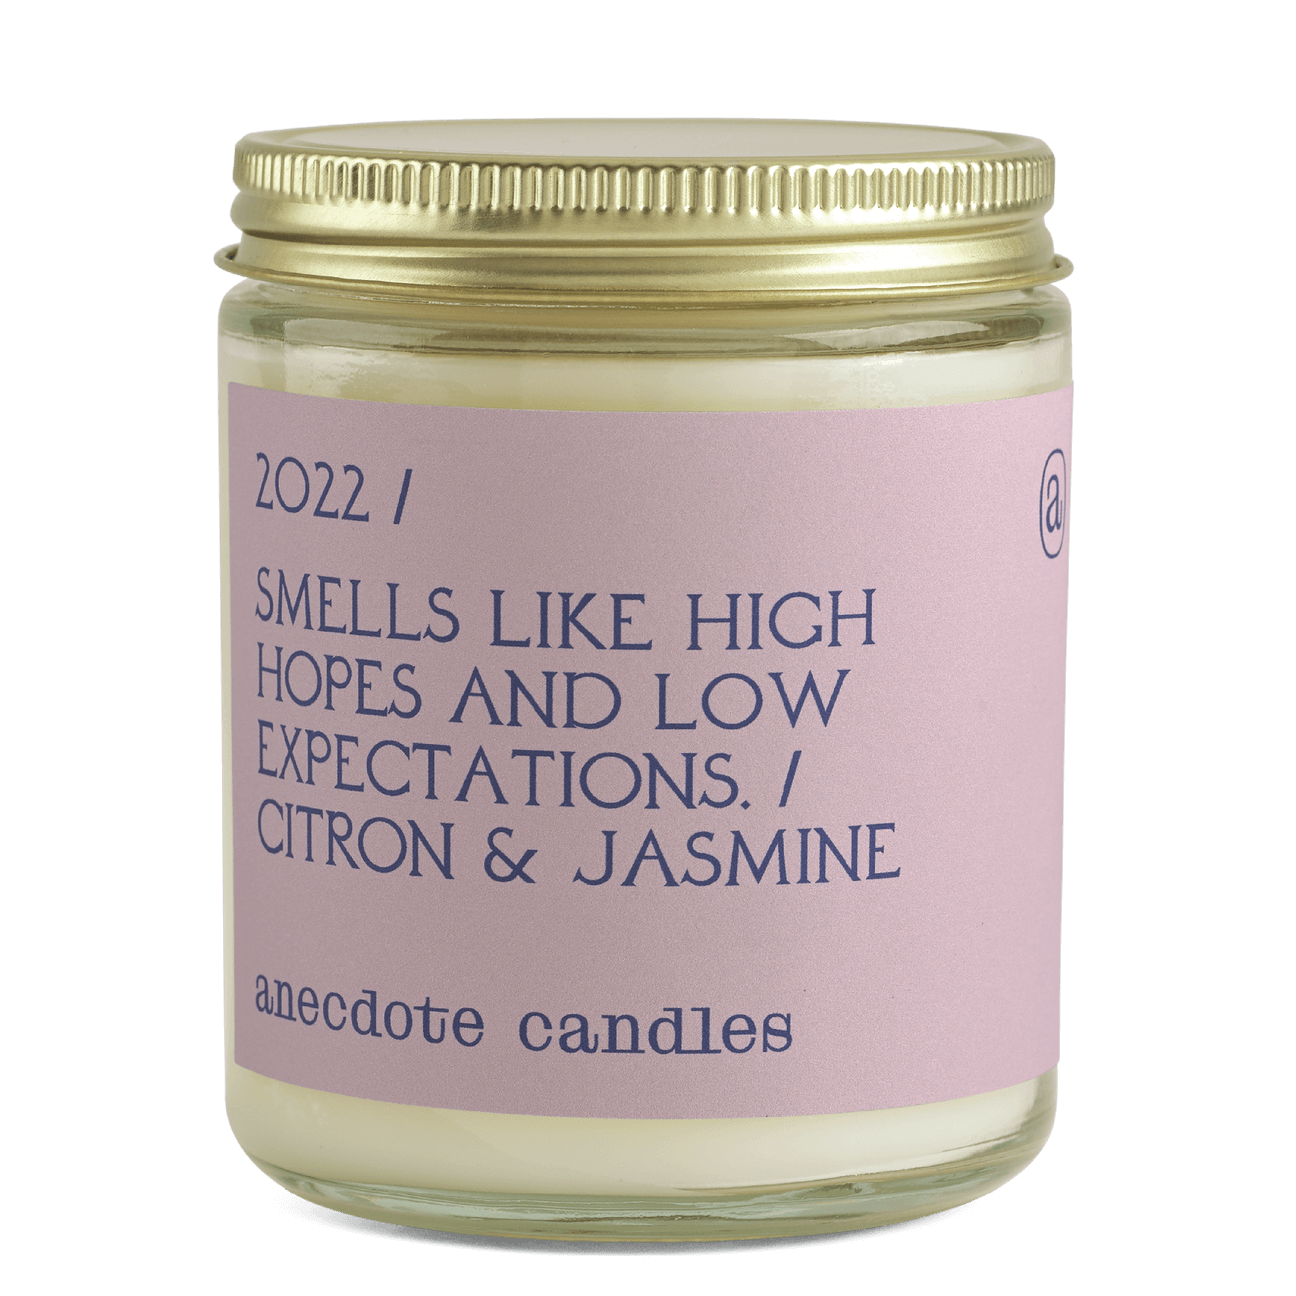 anecdote candles review